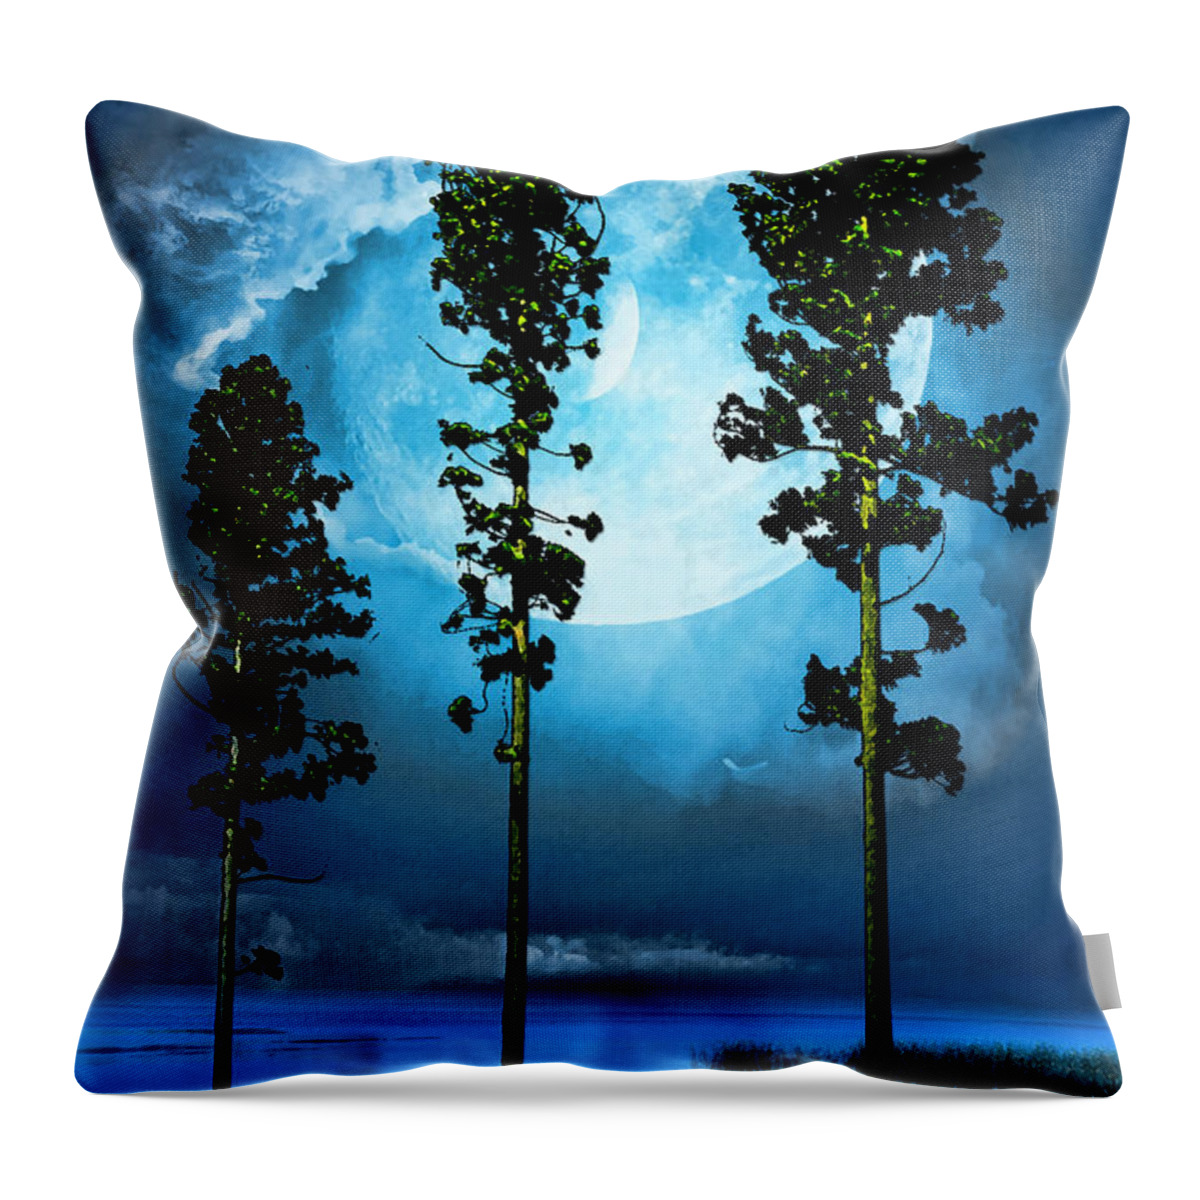  Throw Pillow featuring the painting Clair de Lune by Tyler Robbins